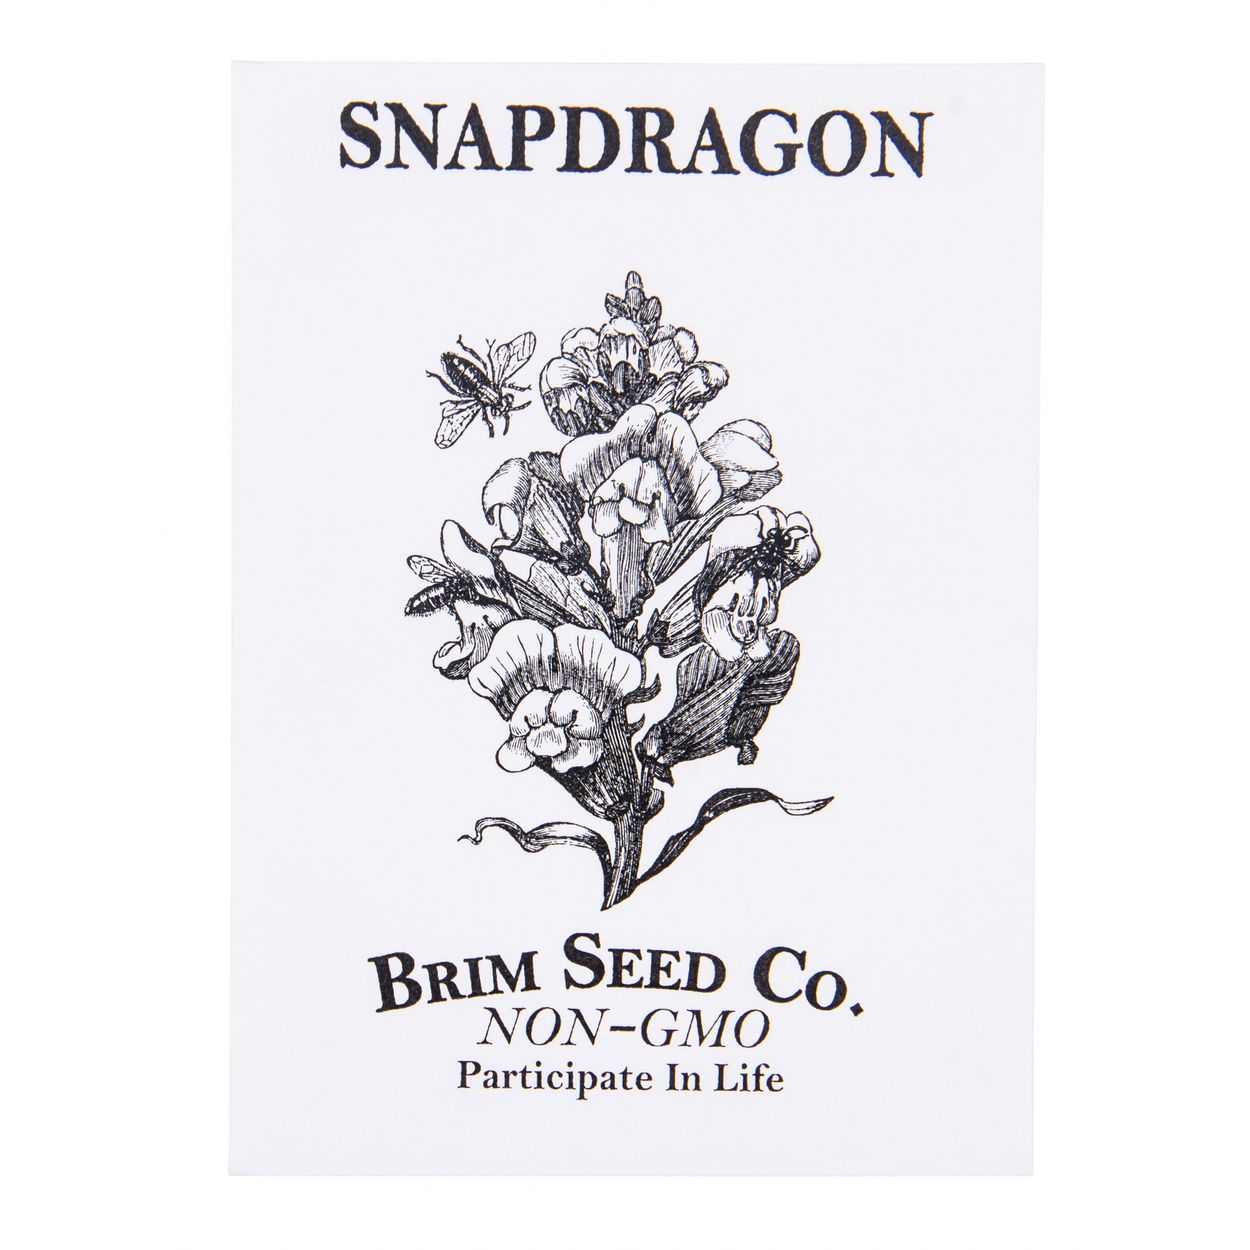 Brim Seed Co. - Mix Snapdragon Flower Seed